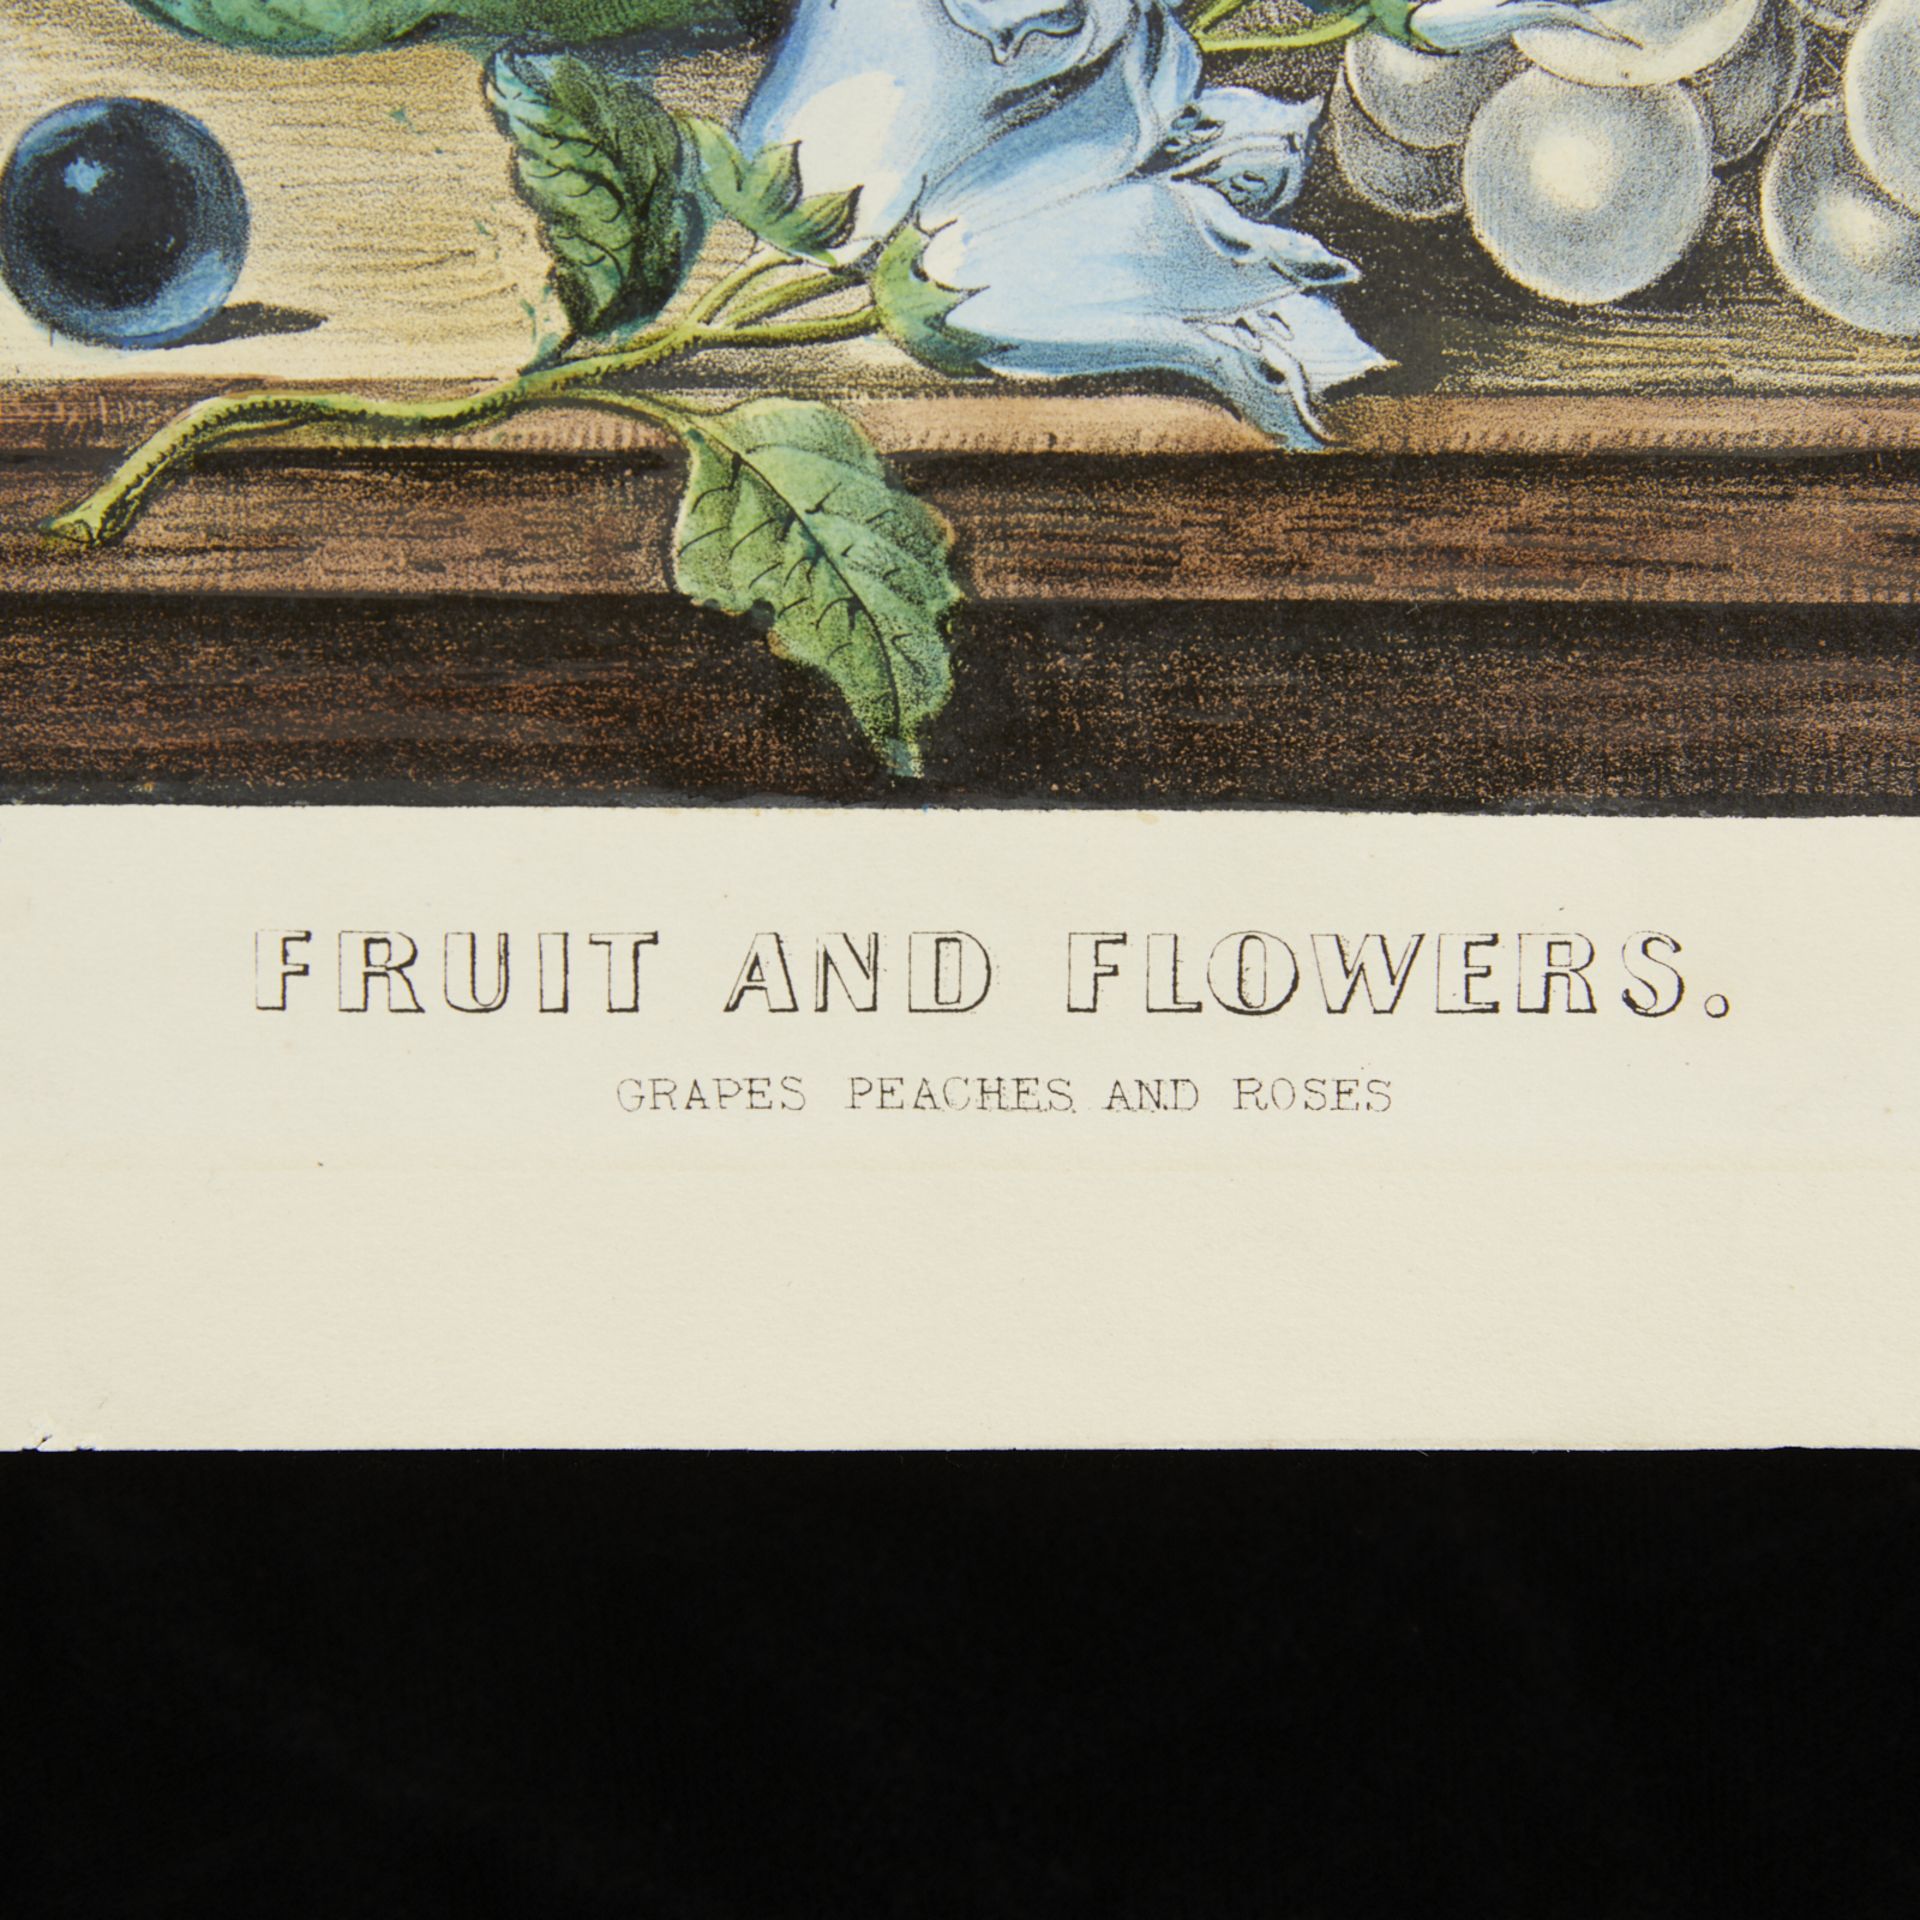 Currier & Ives "Fruit & Flowers" Print 1870 - Image 2 of 8